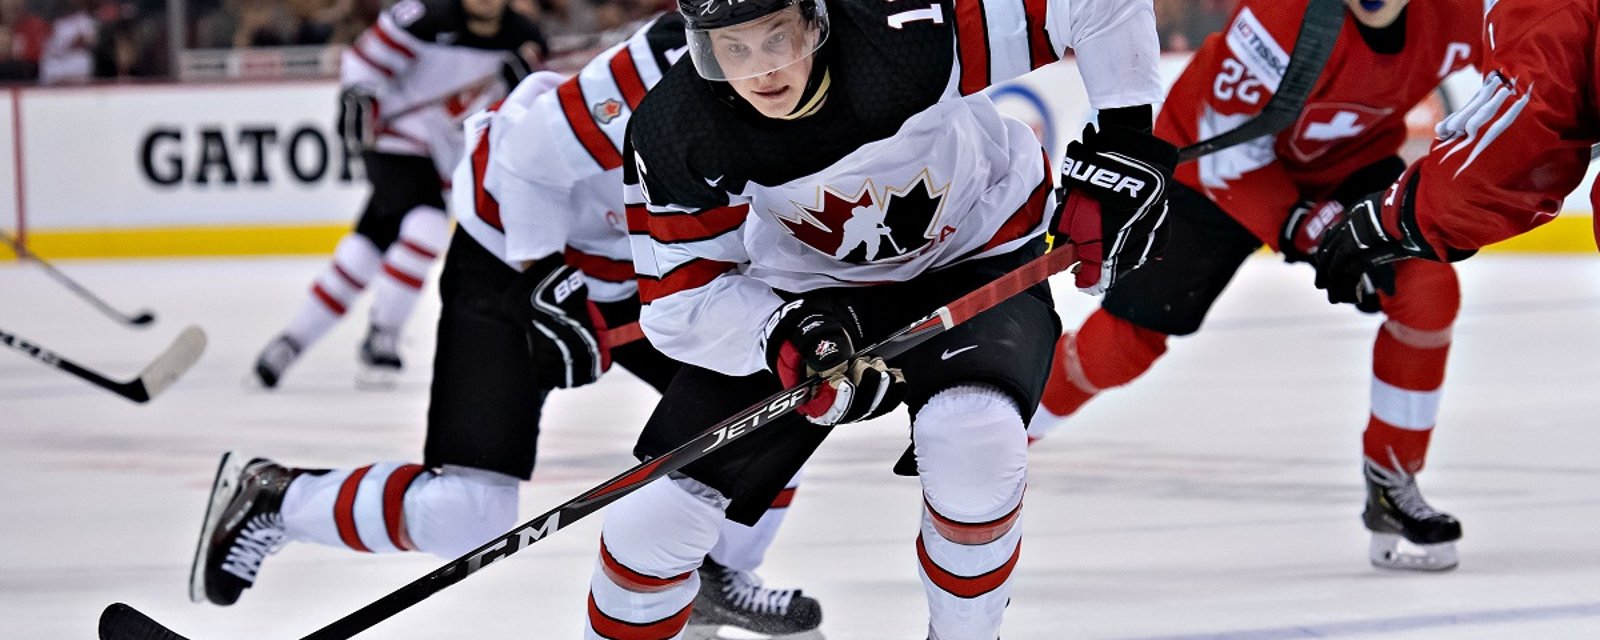 Team Canada forward traded in the middle of World Junior Championship.